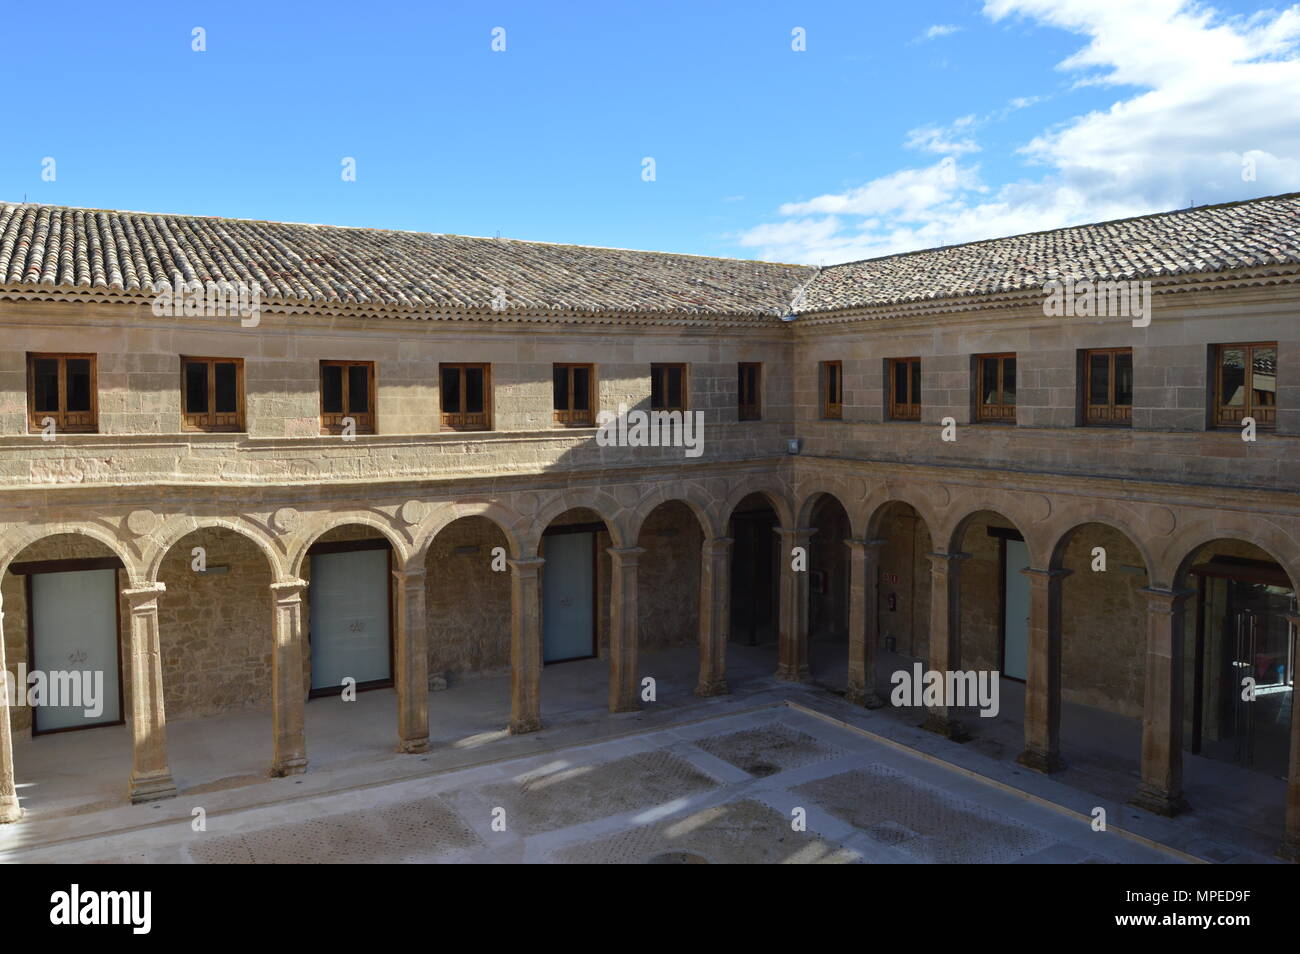 Monastery cloister courtyard seen from above Stock Photo